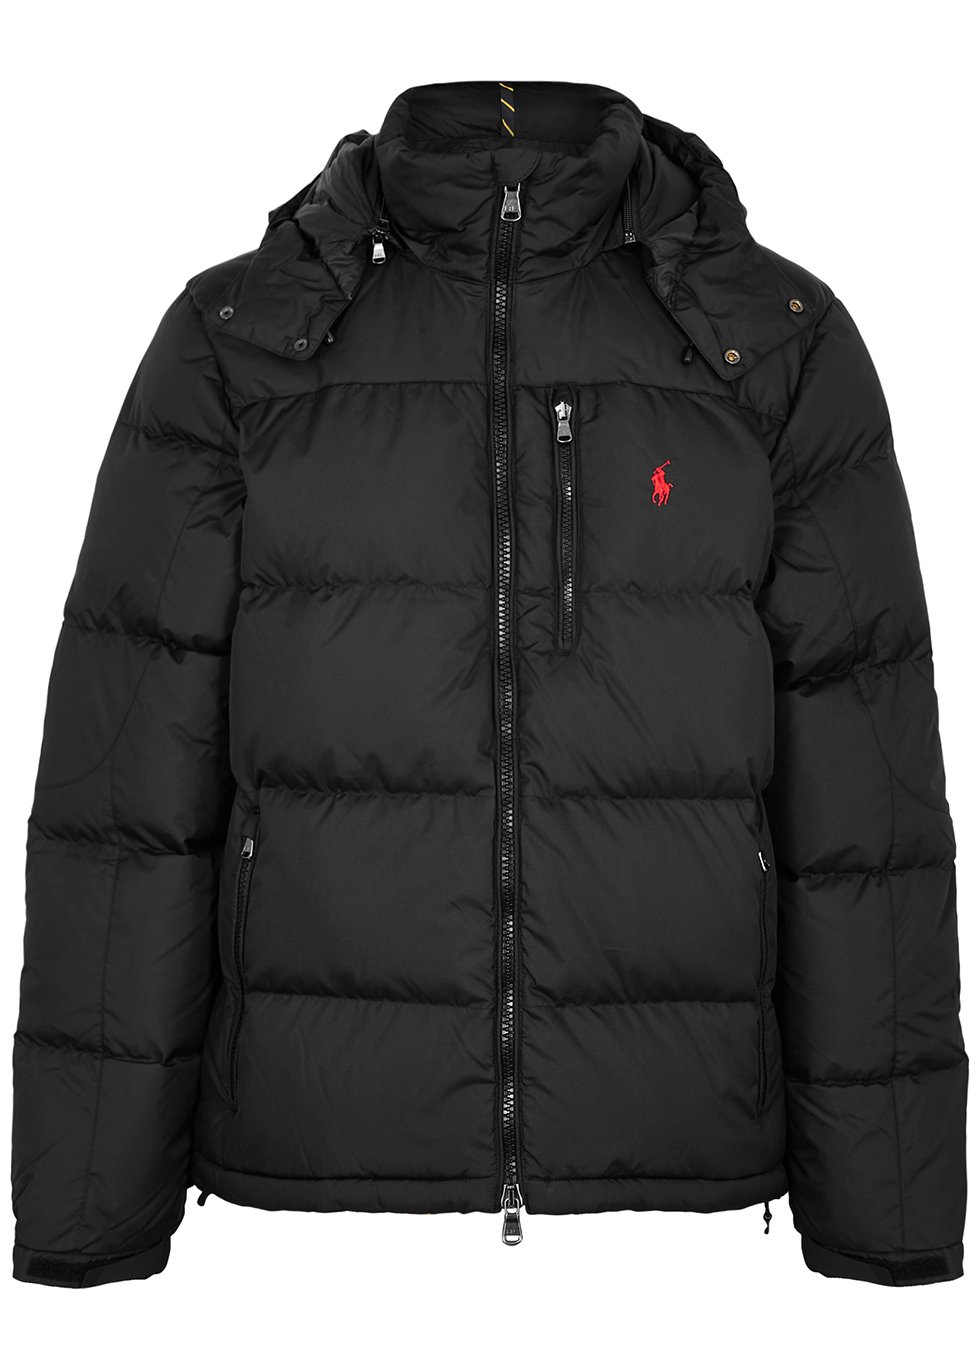 Polo Ralph Lauren Black quilted shell jacket - Harvey Nichols